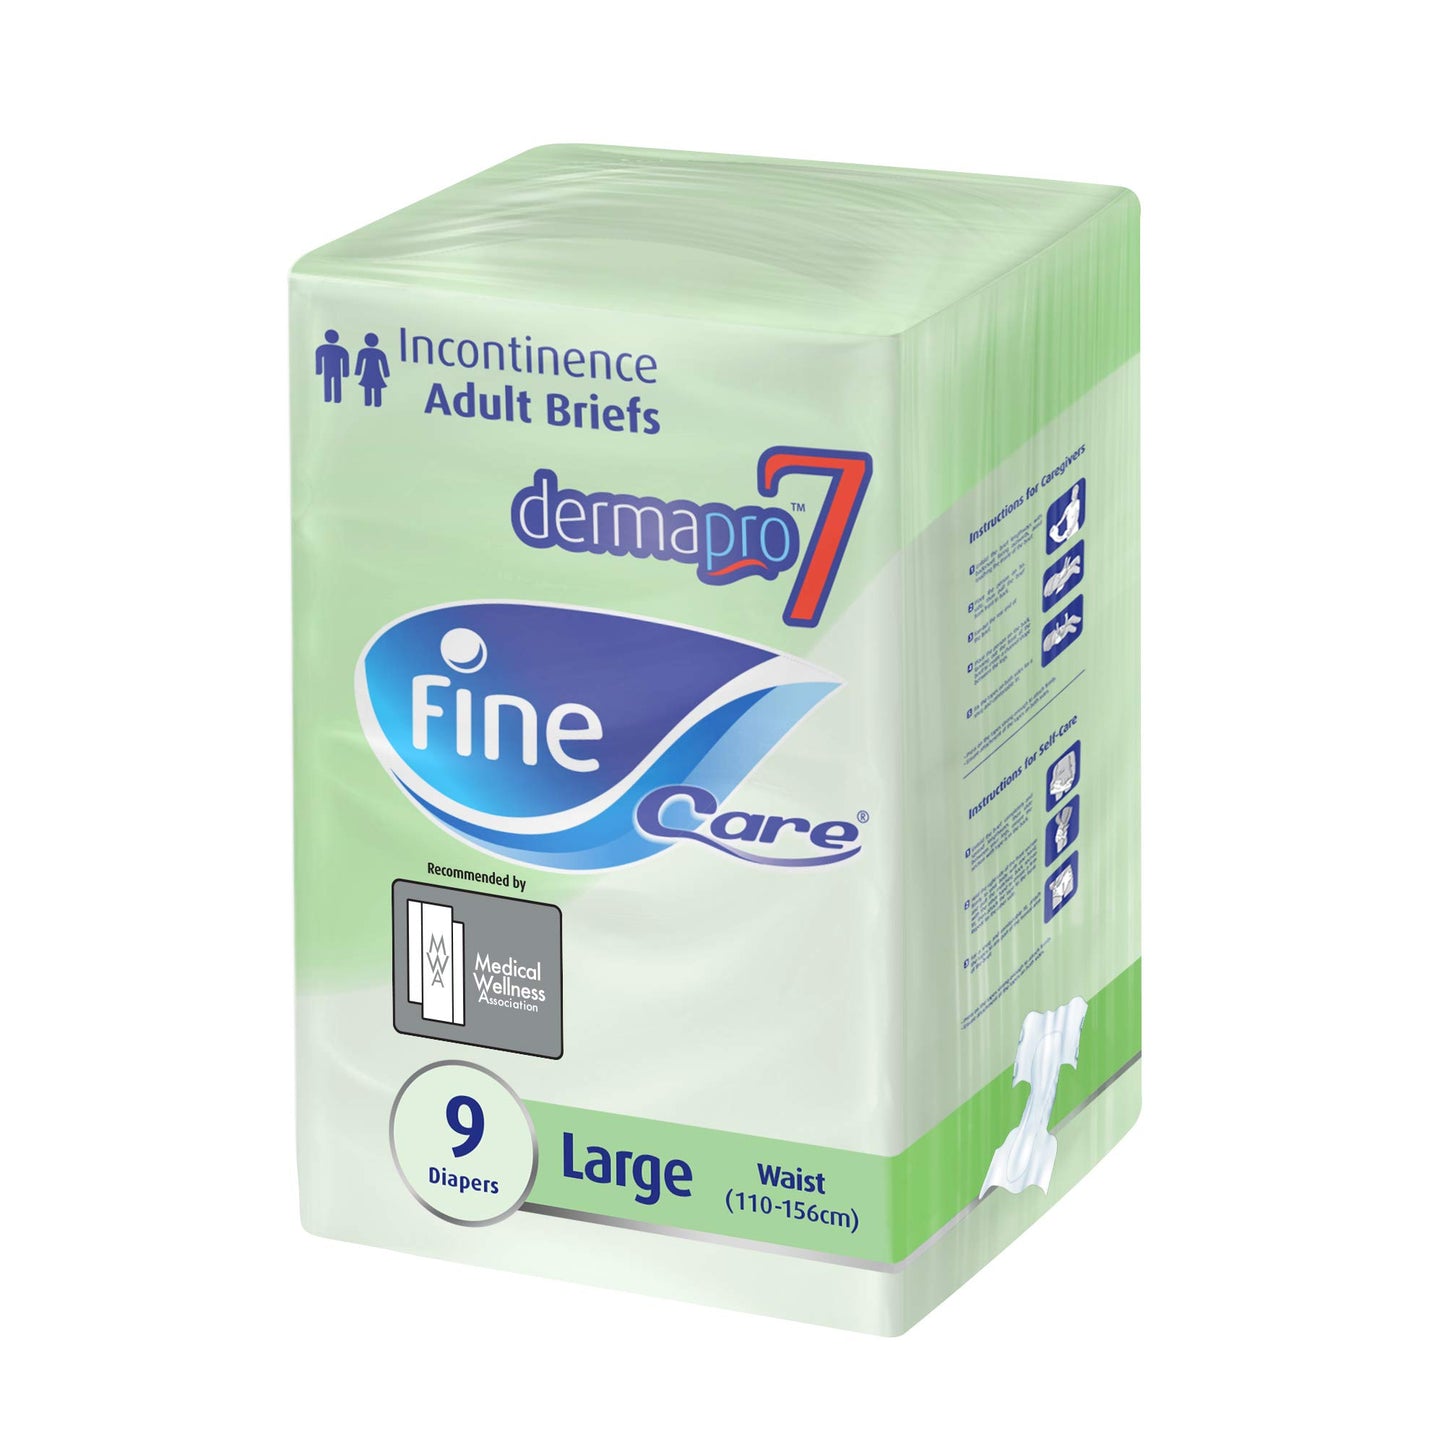 Fine Care Incontinence Unisex Adult Diaper Brief, Large, waist size 100 - 140 cm (39 – 55 Inch), 9 diapers with Maximum Absorbency and Leak Protection